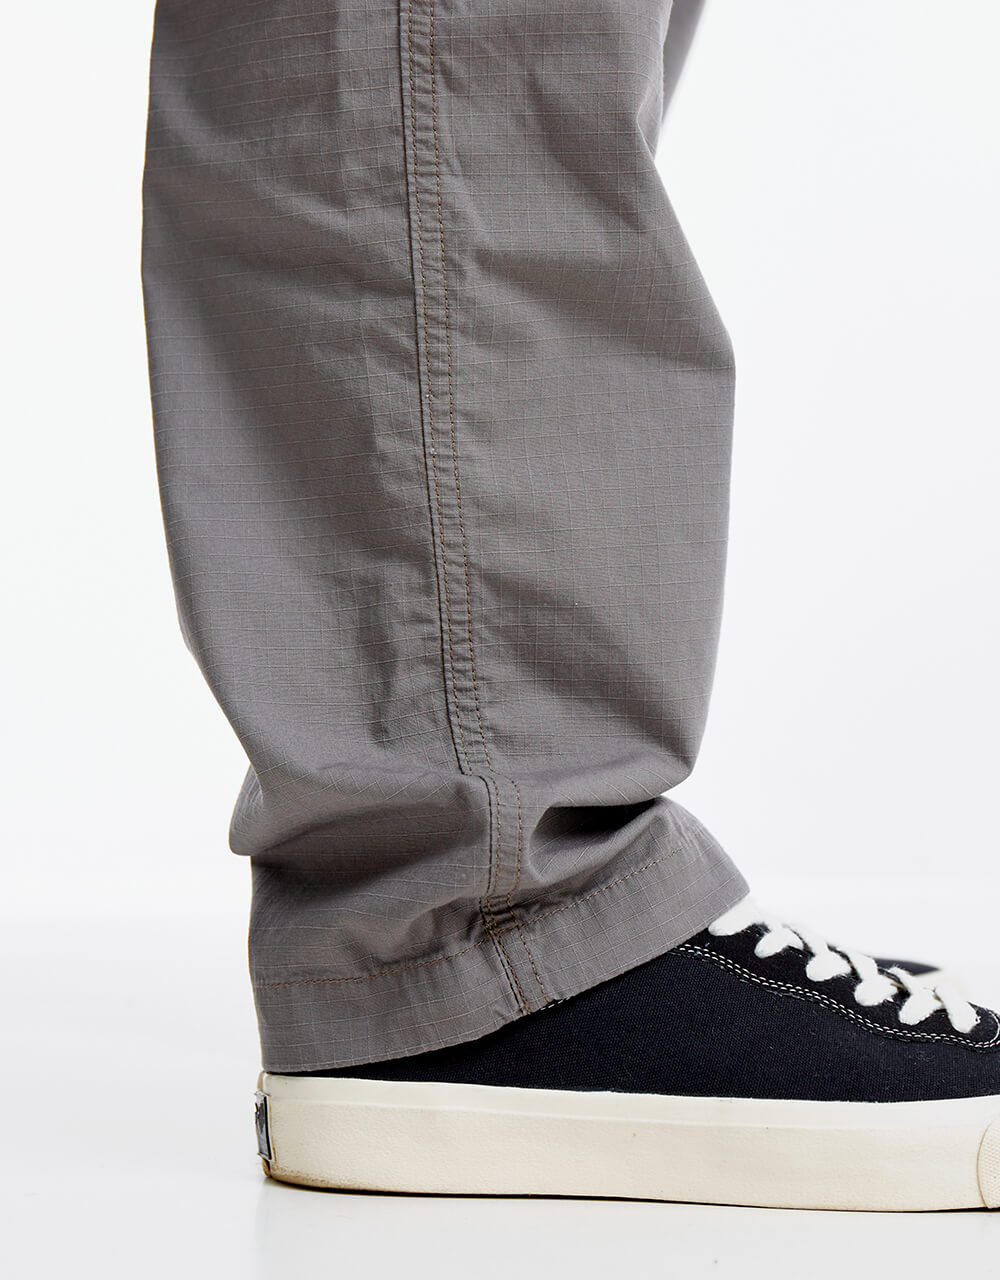 Carhartt WIP Aviation Pant - Anchor (Rinsed)